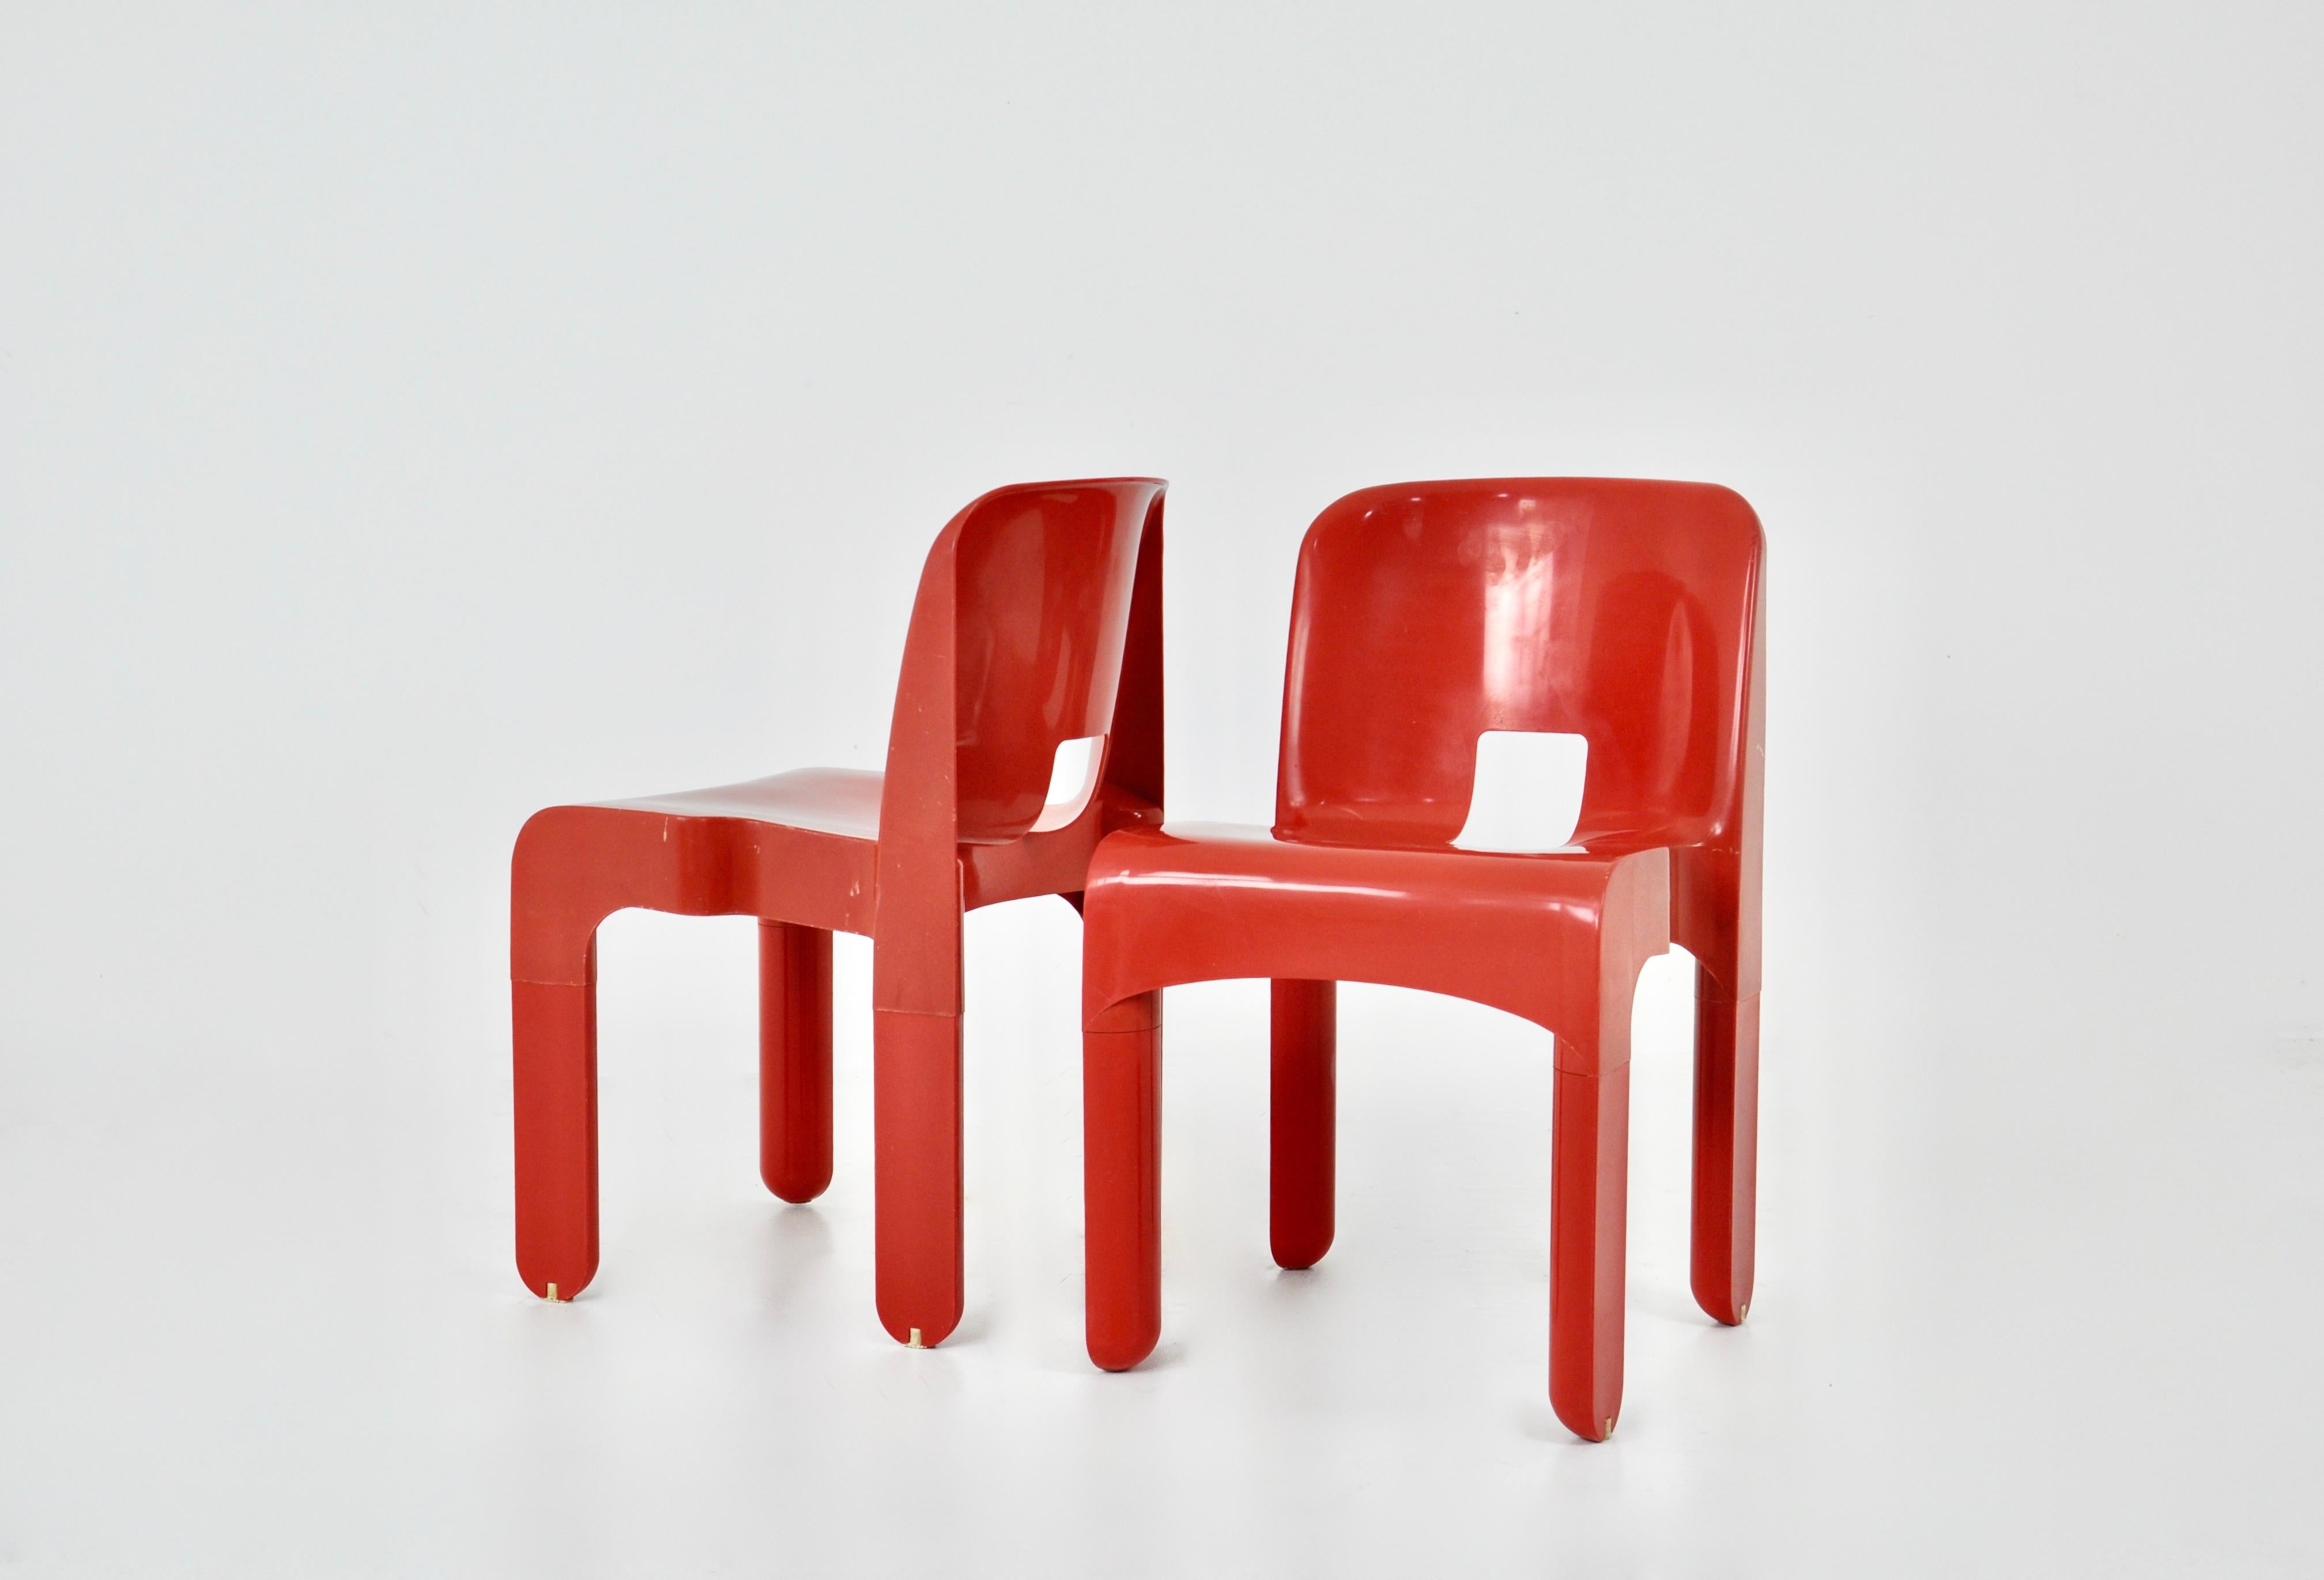 Red chairs by Joe Colombo. Model 4867. Stamped below the chairs. Wear due to time and the age of the chairs.
